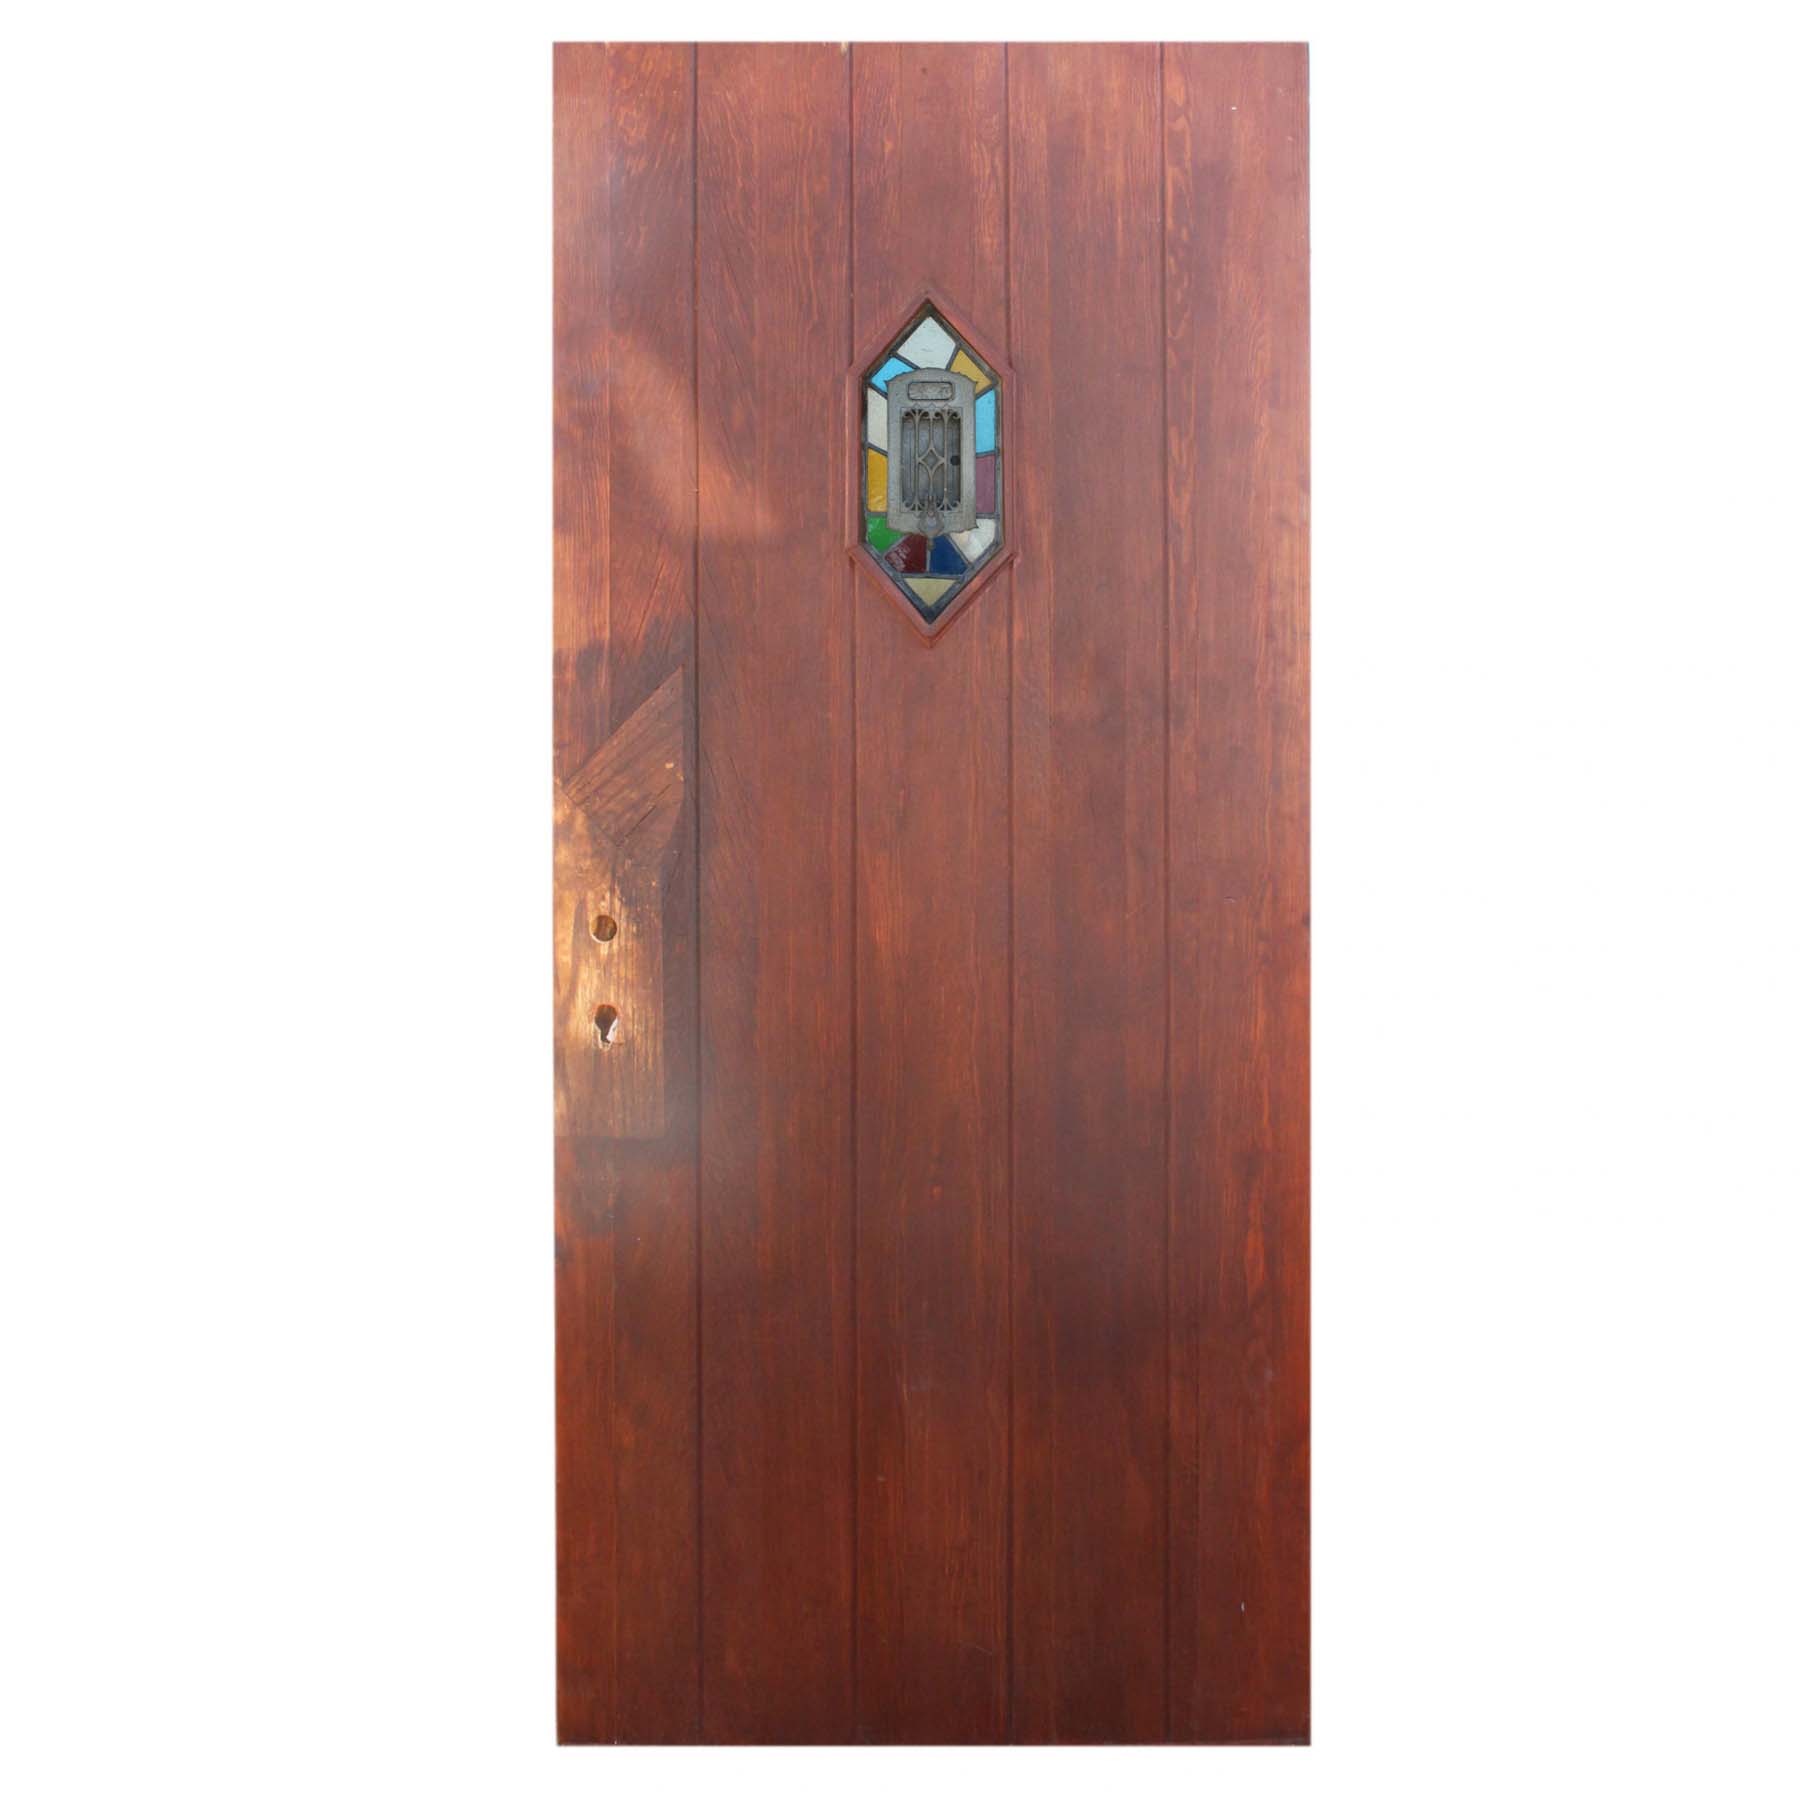 SOLD Reclaimed 35” Plank Door with Stained Glass Speakeasy-0